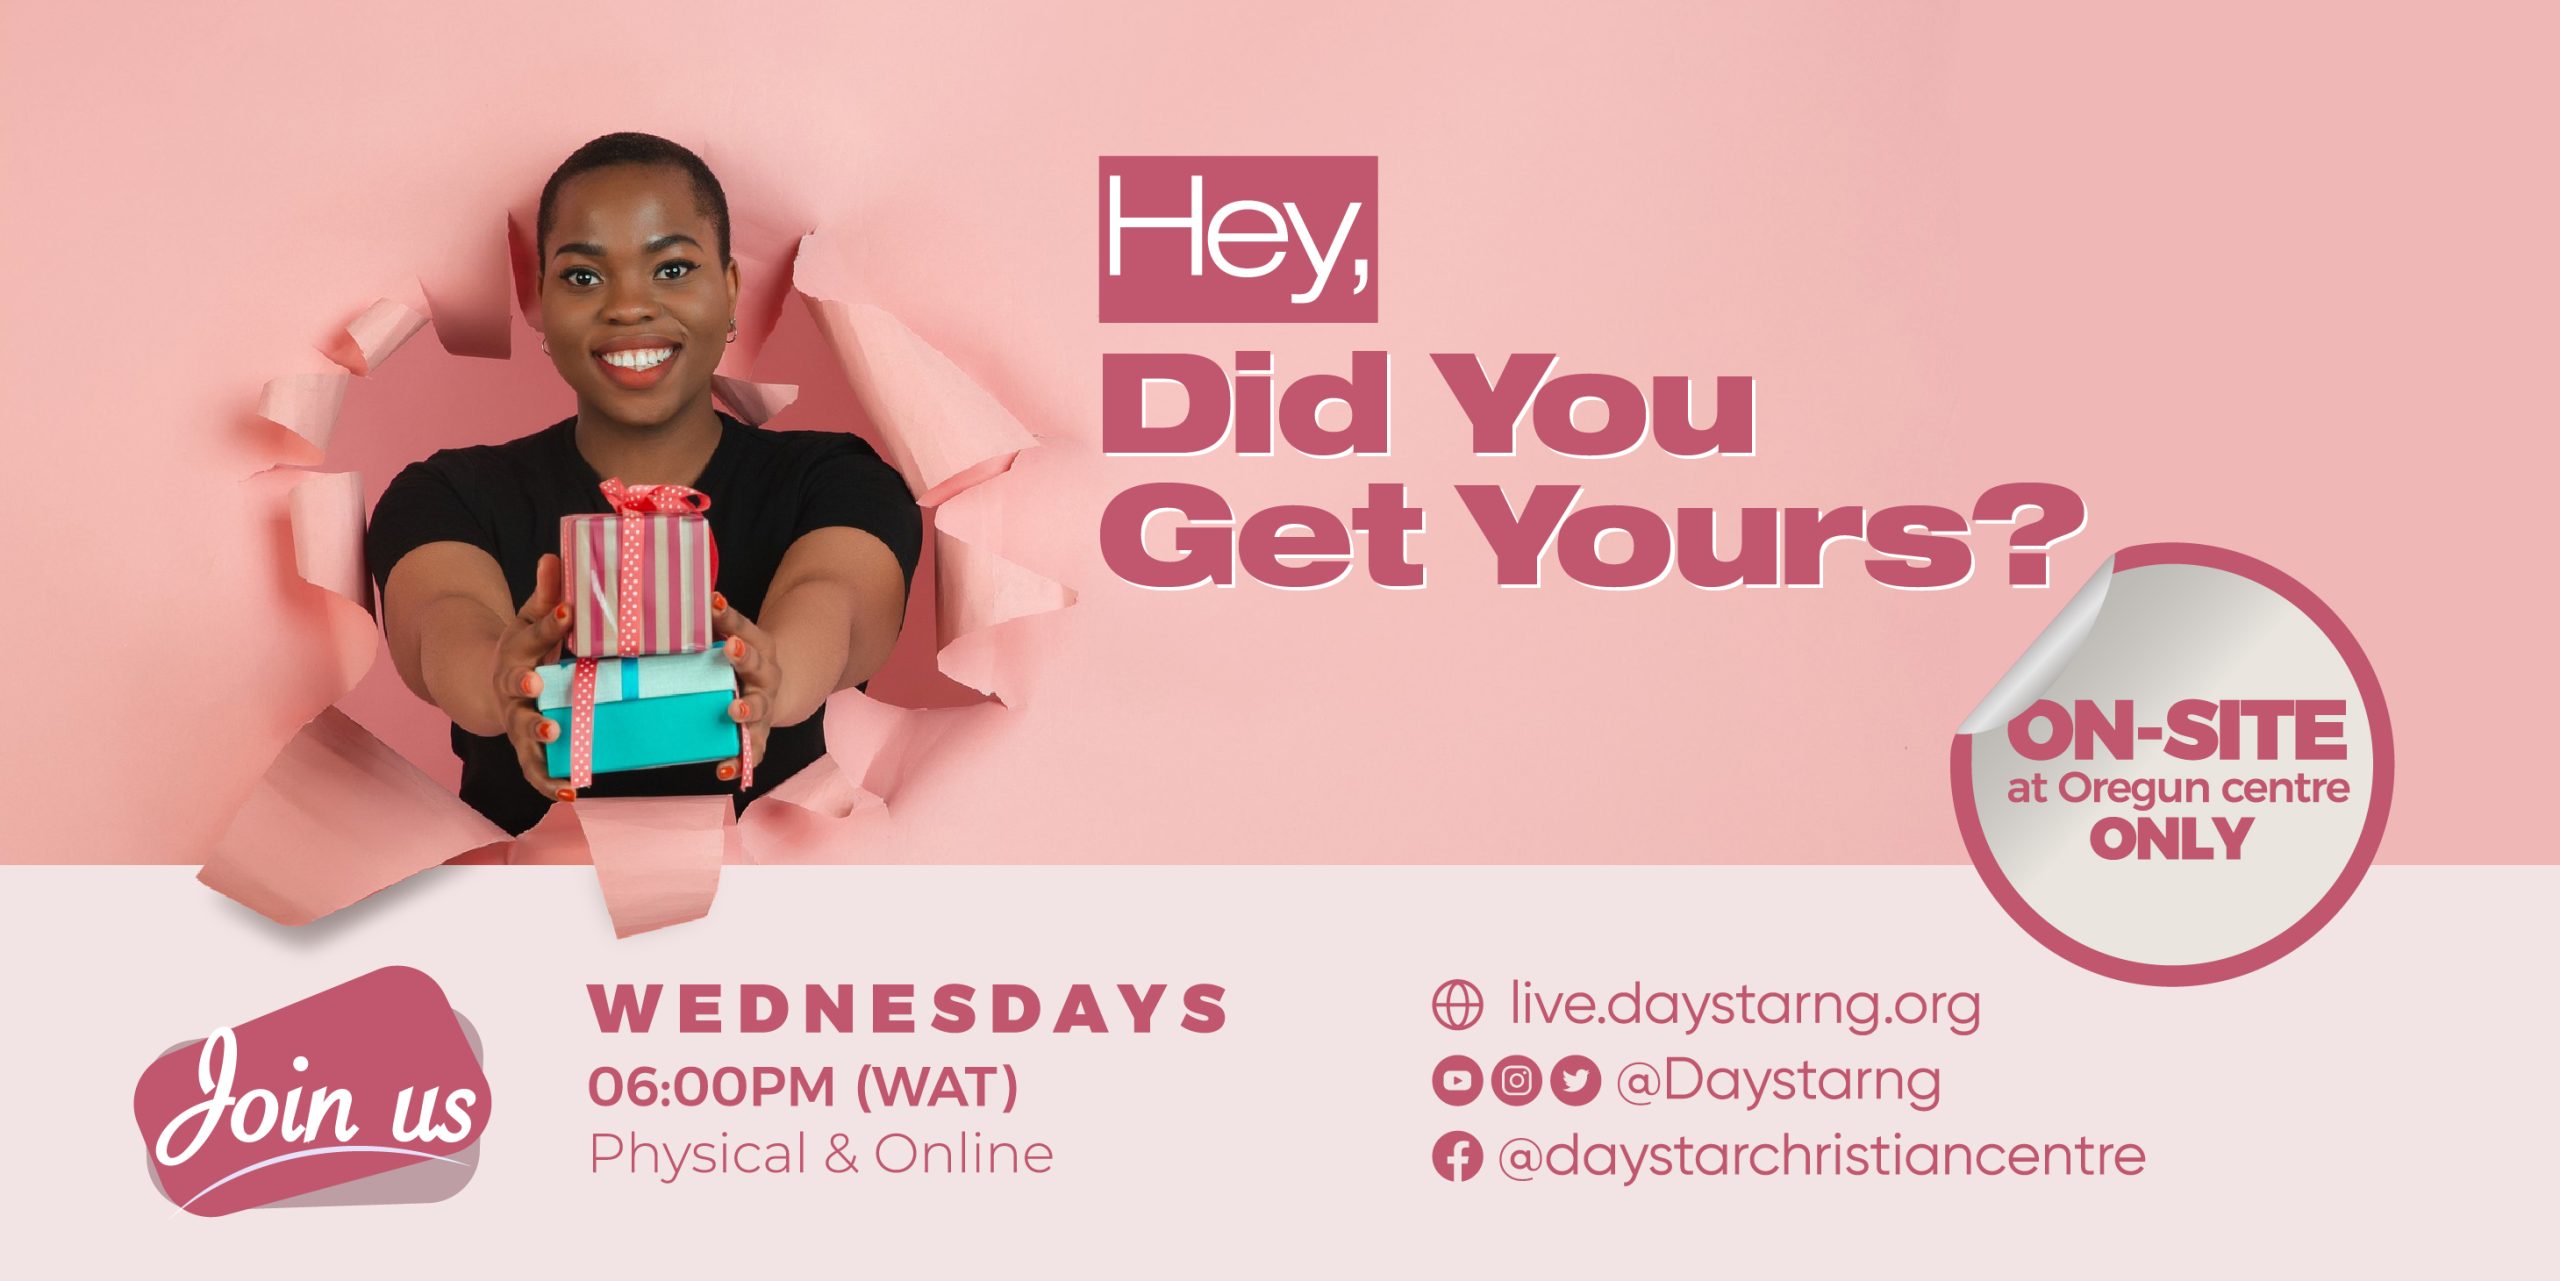 Did You Get Yours? | Daystar Christian Centre